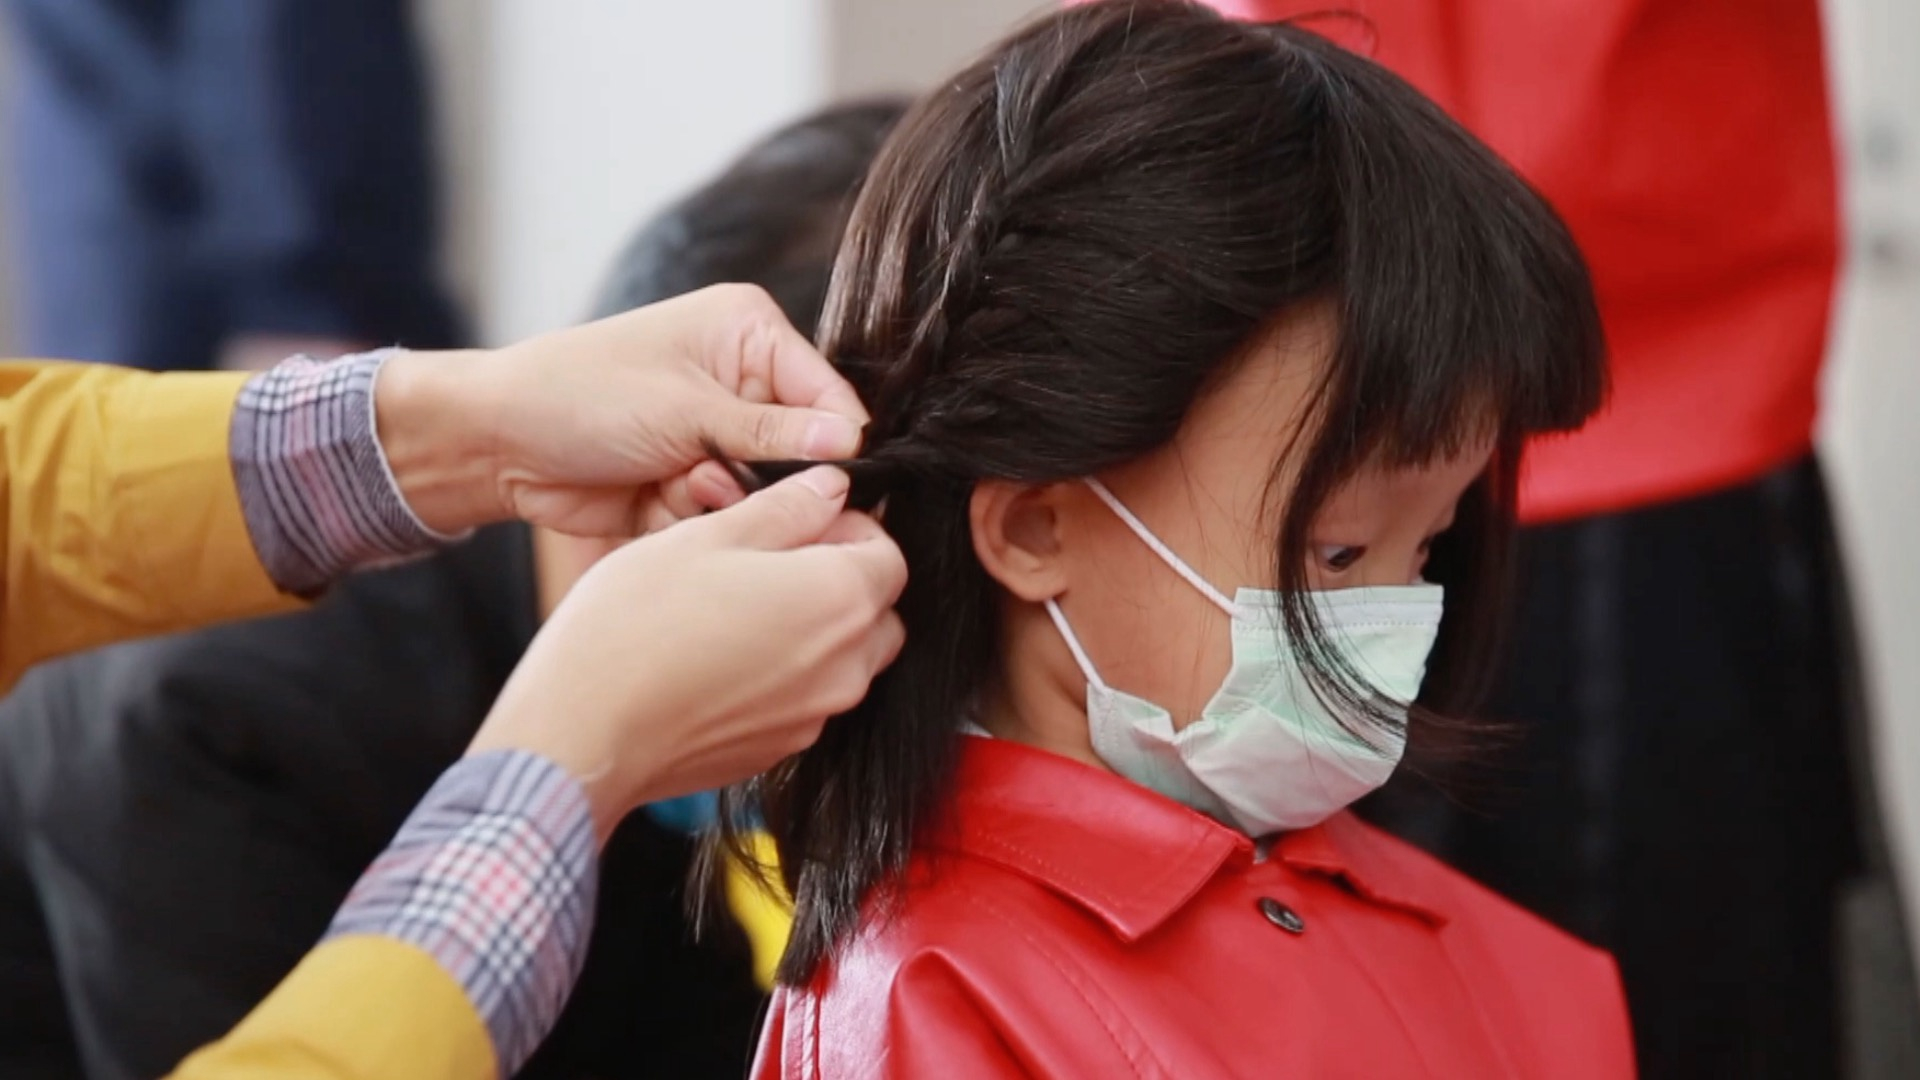 Care by hair: Wig donation helps Chinese children with cancer - CGTN